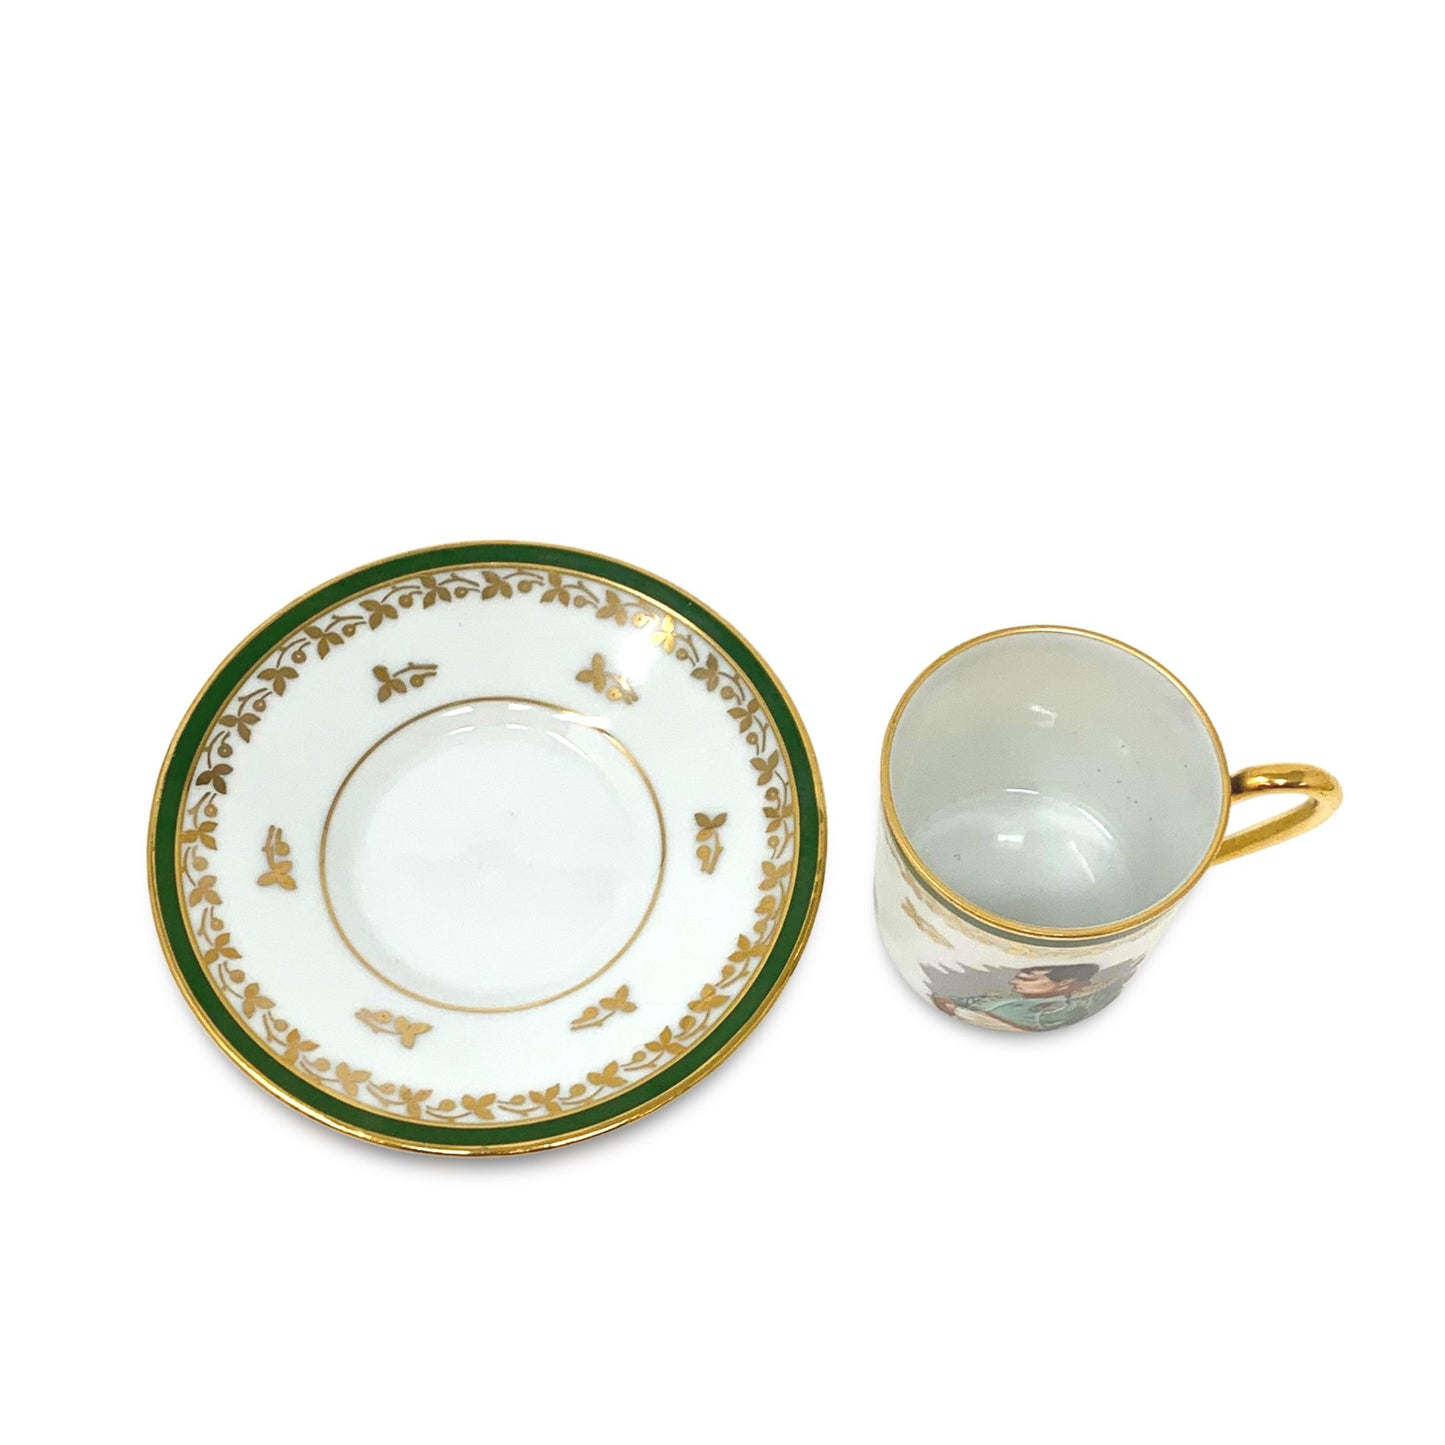 Fontanille & Marraud Limoges Napoleon Espresso Cup and Saucer